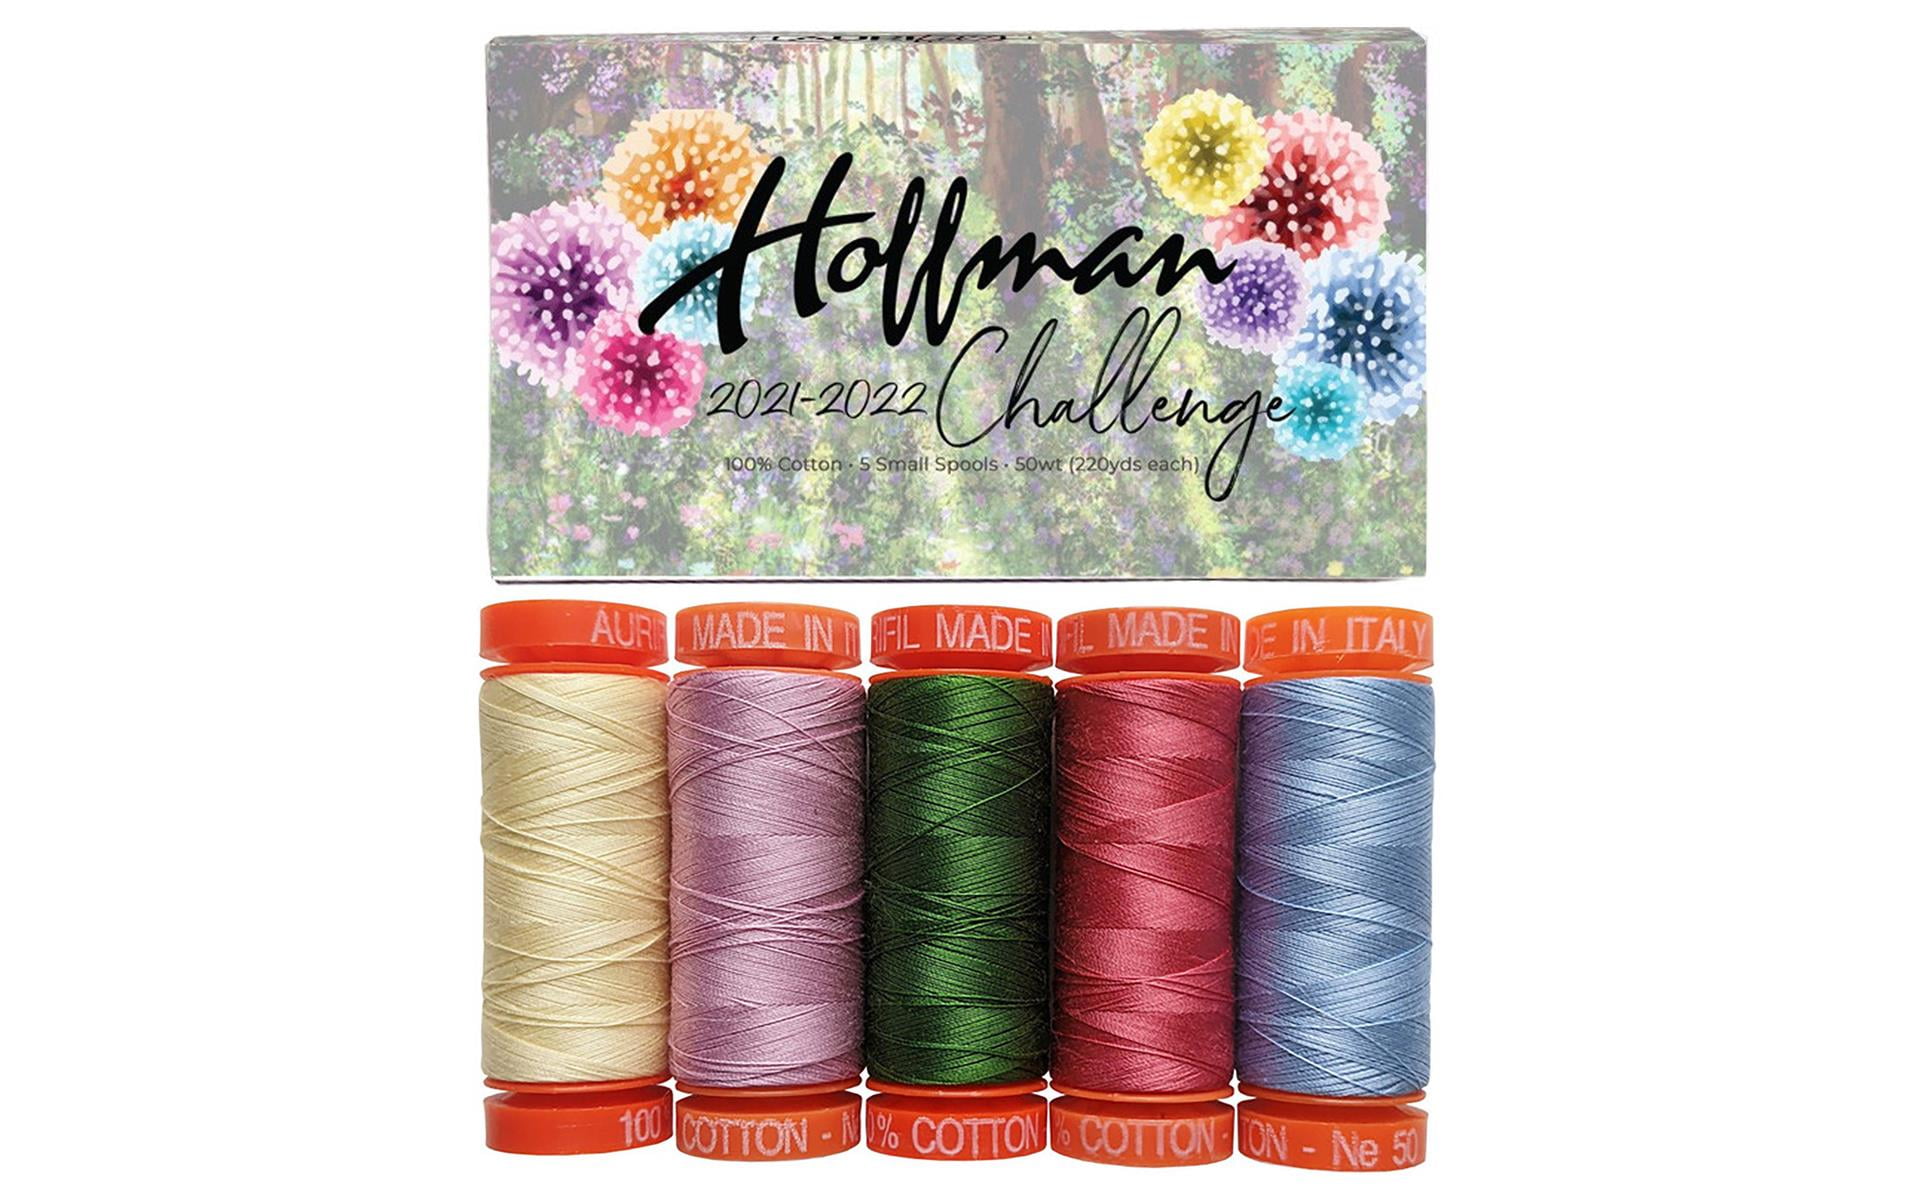 Aurifil Thread Kit 2021/2022 Hoffman Challenge Designer Collection 5 SMALL  SPOOLS 50WT Assorted Colors 220yds Each 